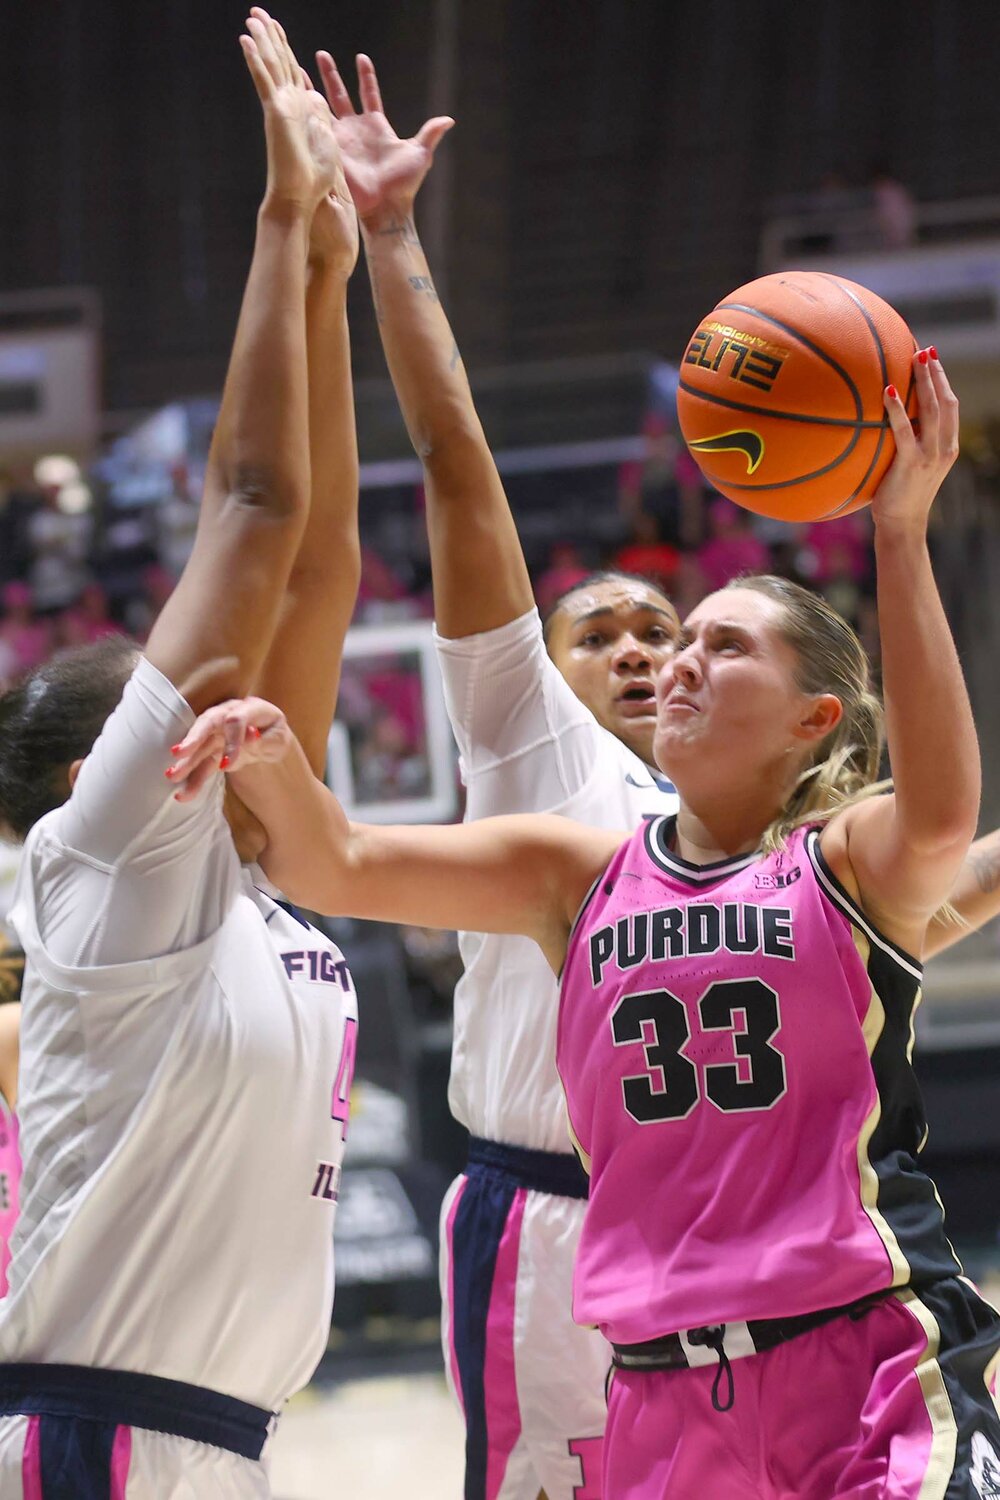 Madison Layden of Purdue - going up for shot against Camille Hobby of Illinois